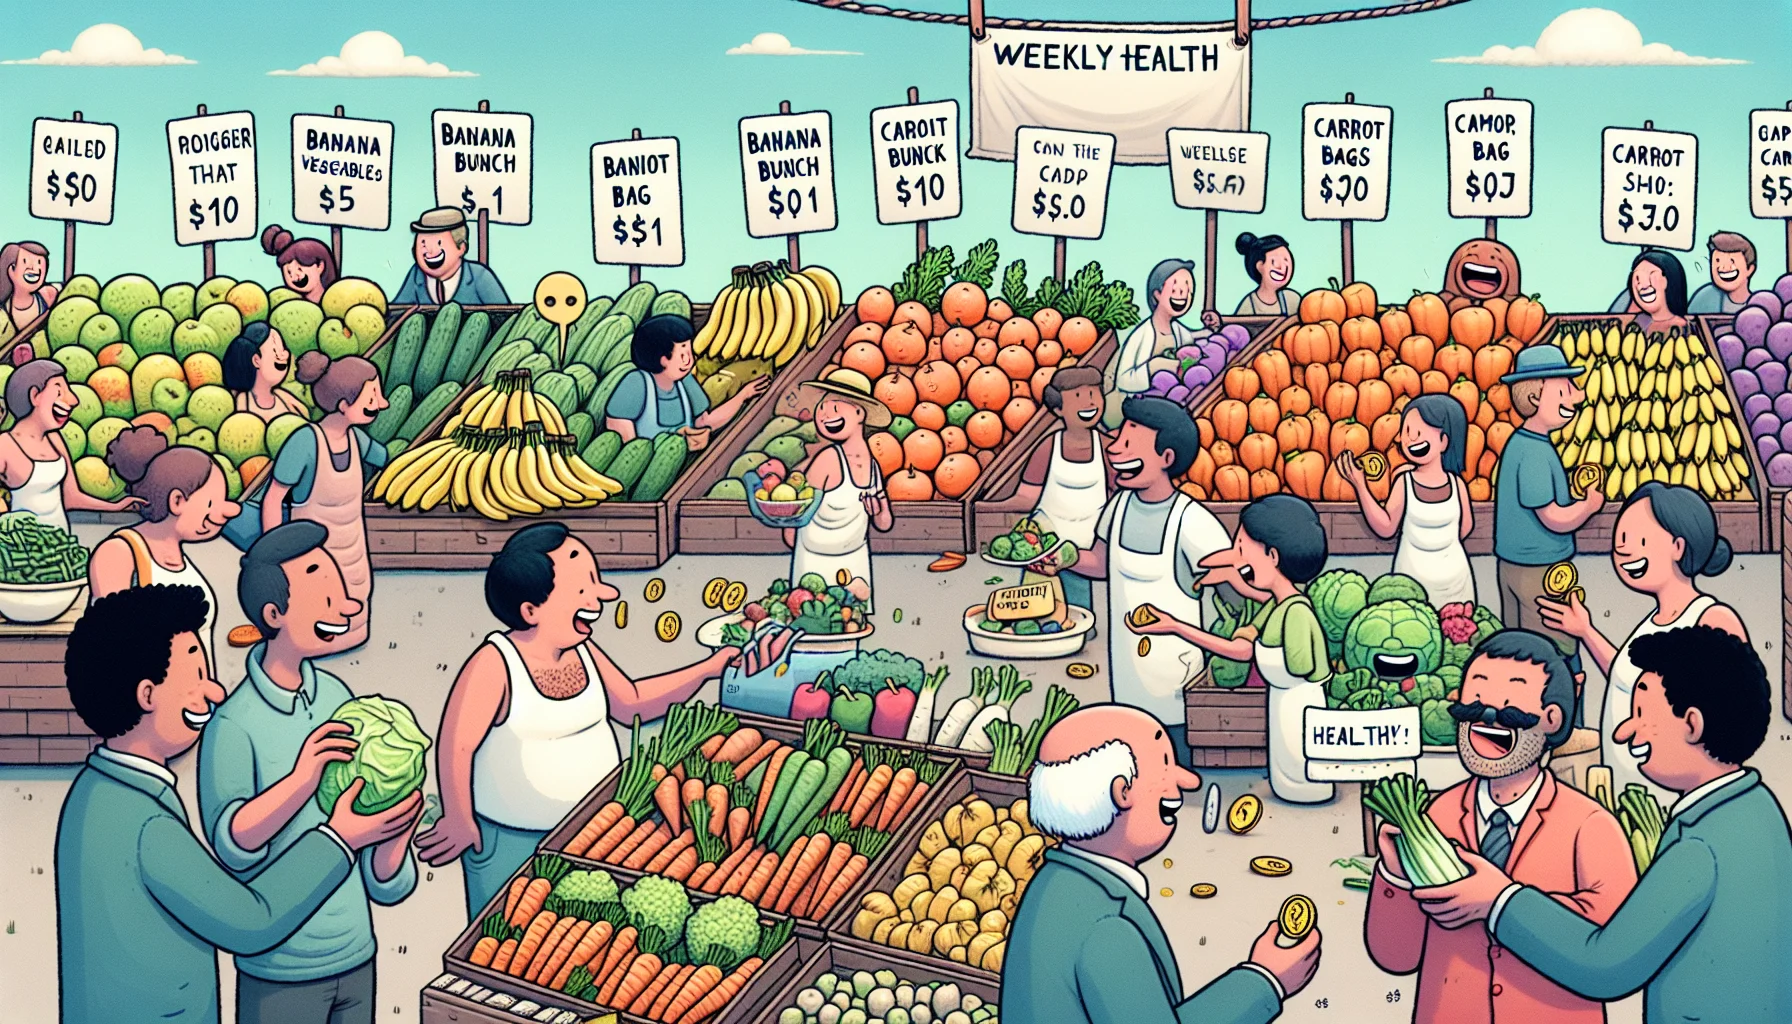 Illustrate a humorous scenario under the theme of 'Weekly Health Insight'. In this picture, display a big fruit and vegetable market, busily active with people of different genders and descents buying fresh produce. Show a few creative price tags with ridiculously low prices like 'Banana Bunch - $1', 'Carrot Bag - $0.75', sparking amusement. Perhaps include a couple exchanging a healthy, homemade salad for a few coins, laughing together and clearly enjoying the swap. The funny and lively atmosphere of the scene should make it appealing and enticing, promoting the message of eating healthy for less money.